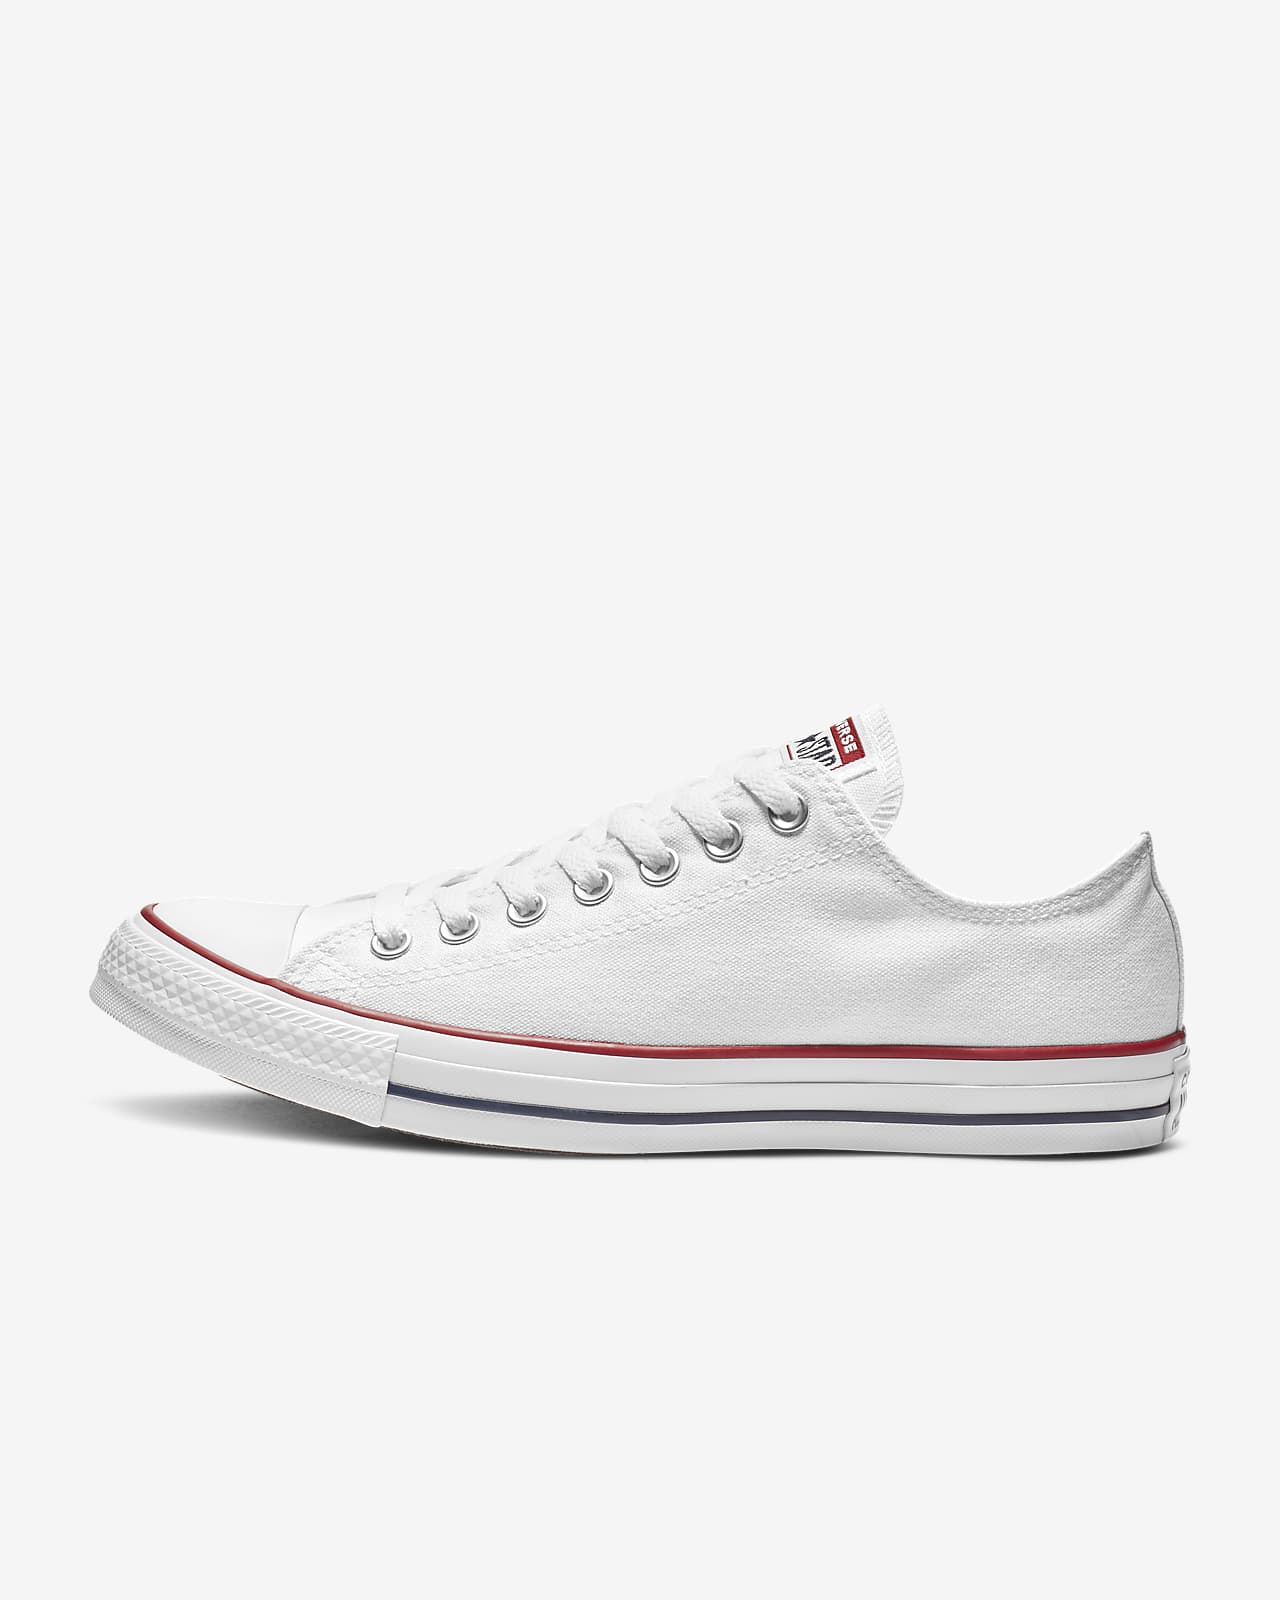 Converse Chuck Taylor All Star Low Top Unisex Shoe